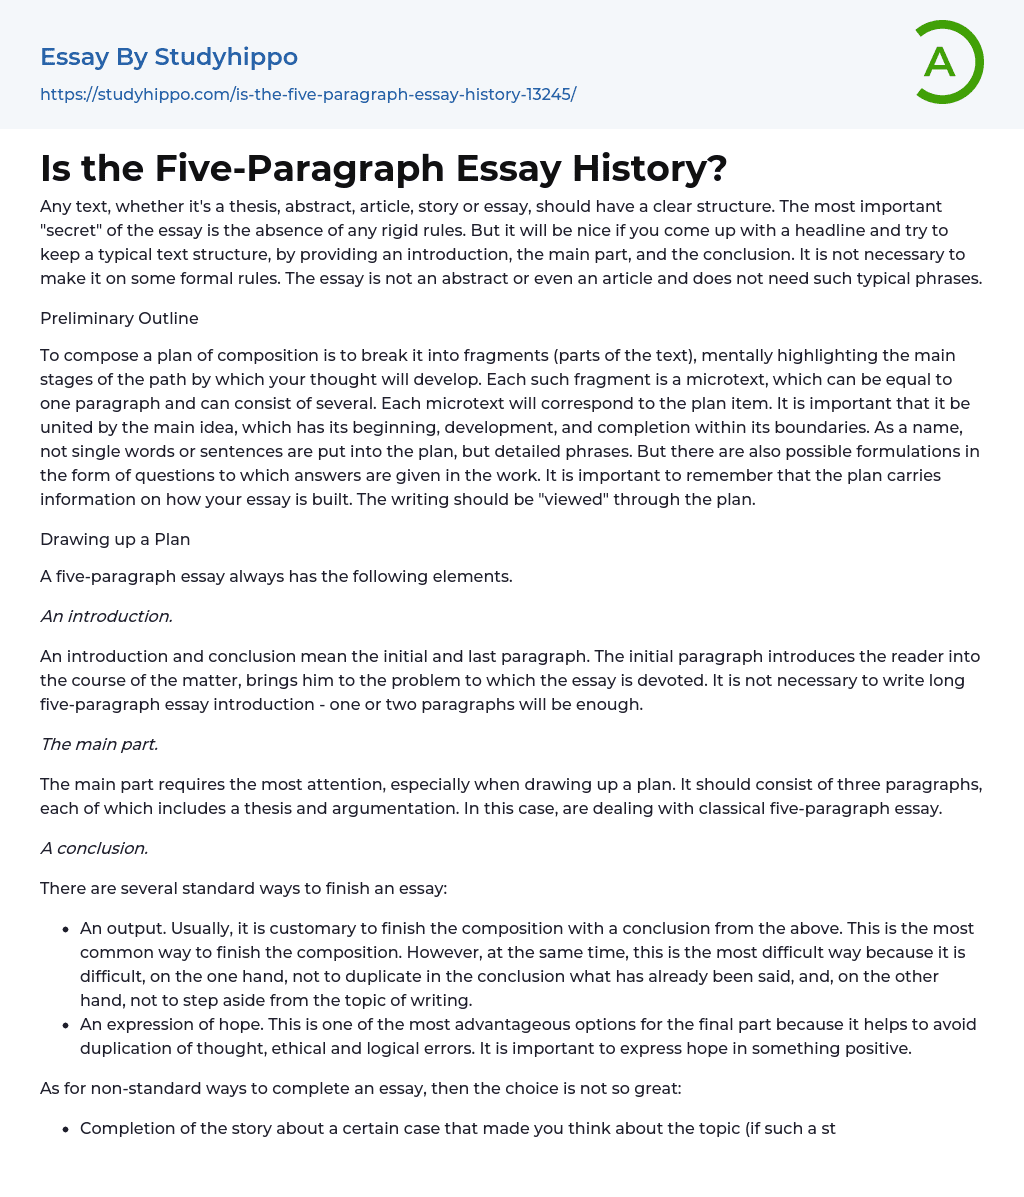 Is the Five-Paragraph Essay History?